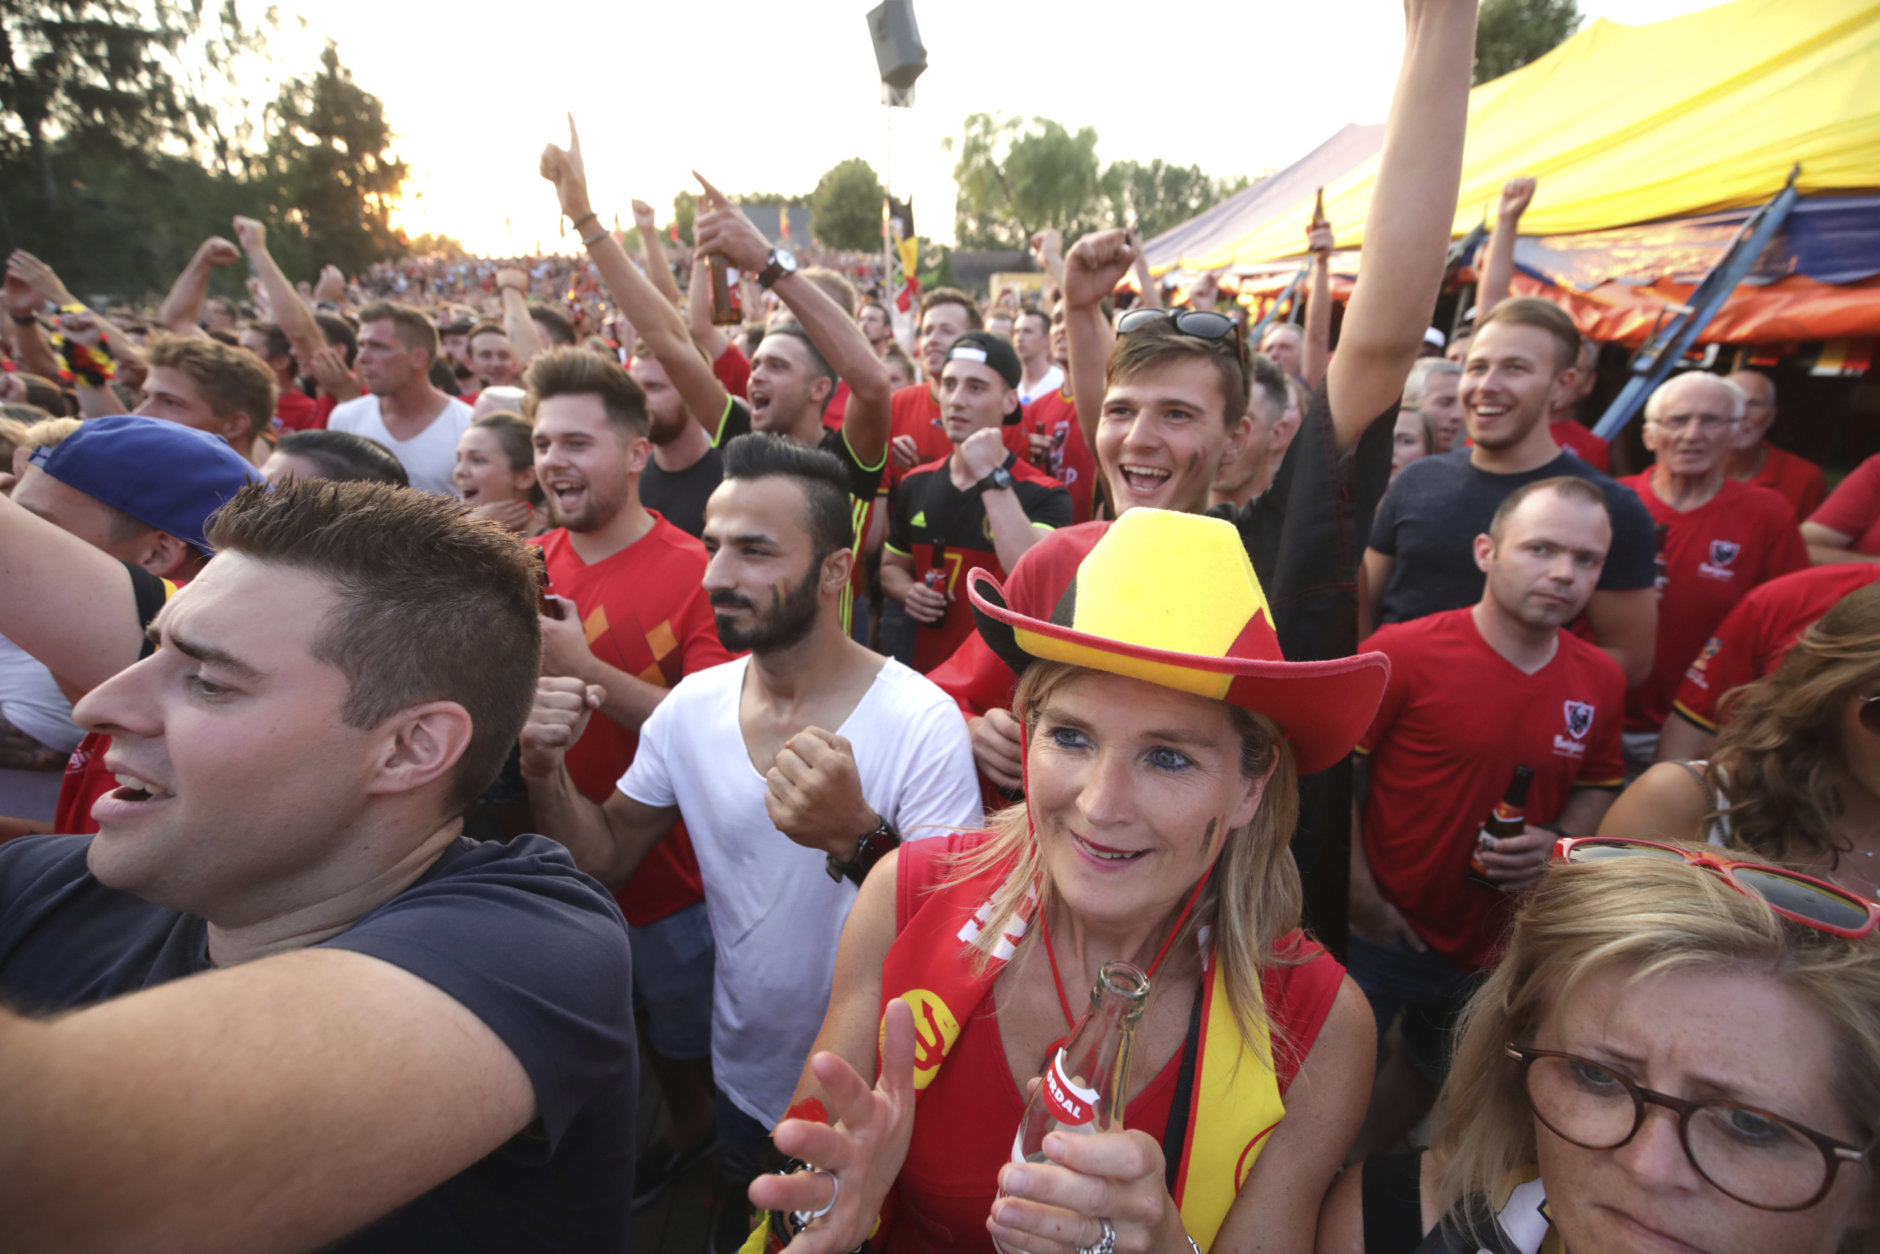 Belgian fans react as they watch a World Cup soccer match between Belgium and Brazil at a large screen event in Heist-op-den-Berg, Belgium, Friday, July 6, 2018. (AP Photo/Olivier Matthys)